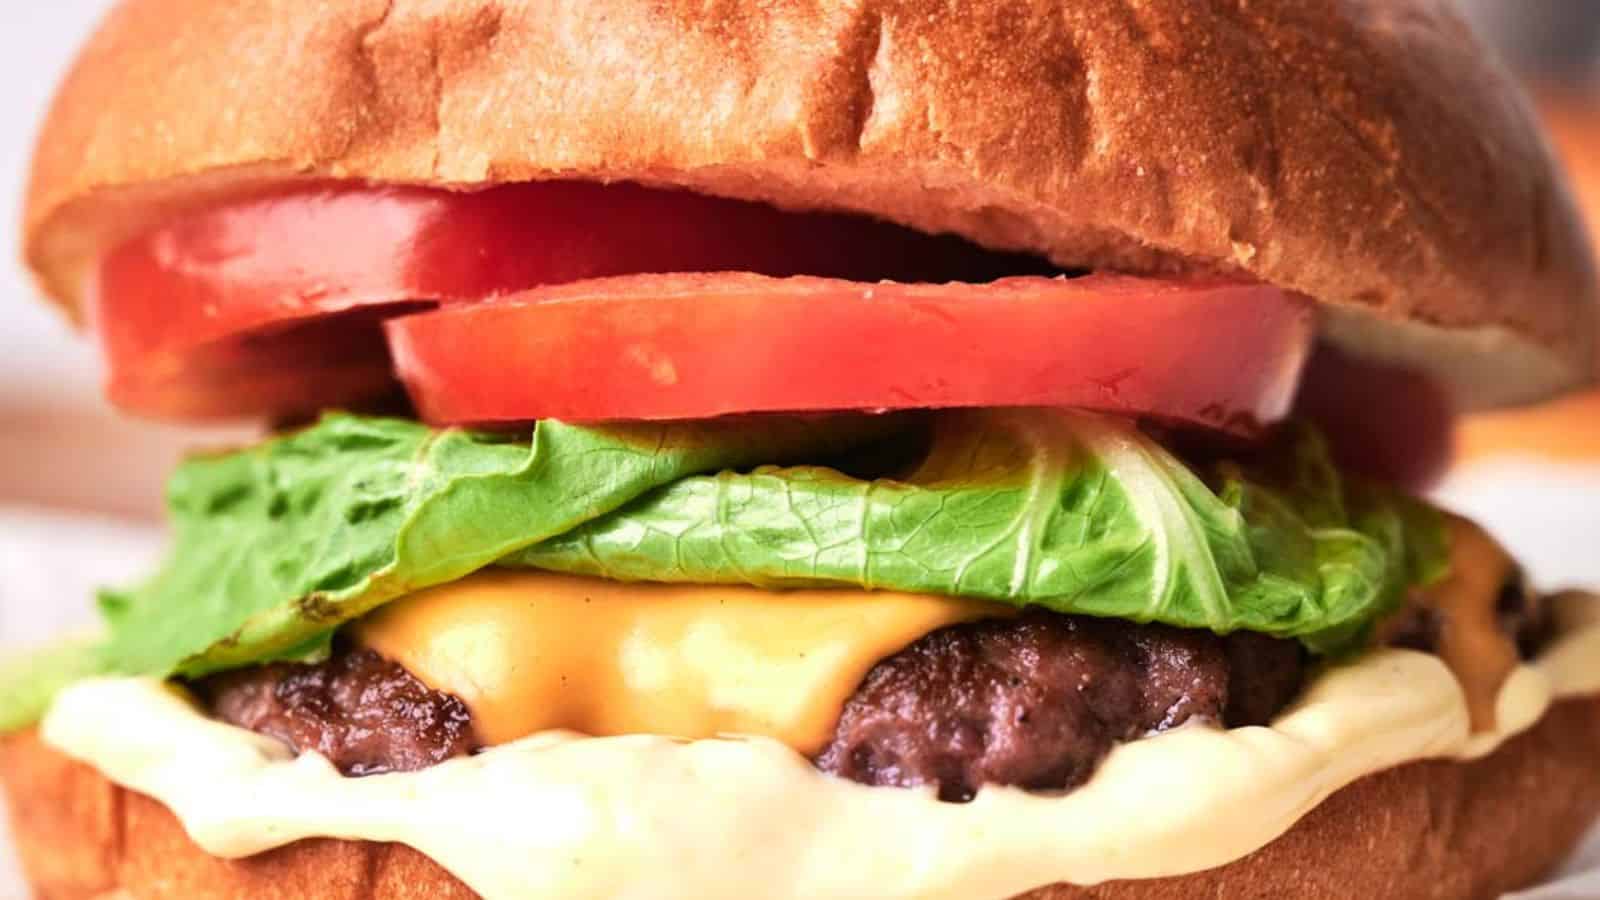 Close-up of a copycat smash burger with lettuce, tomato, and a thick beef patty on a sesame seed bun.